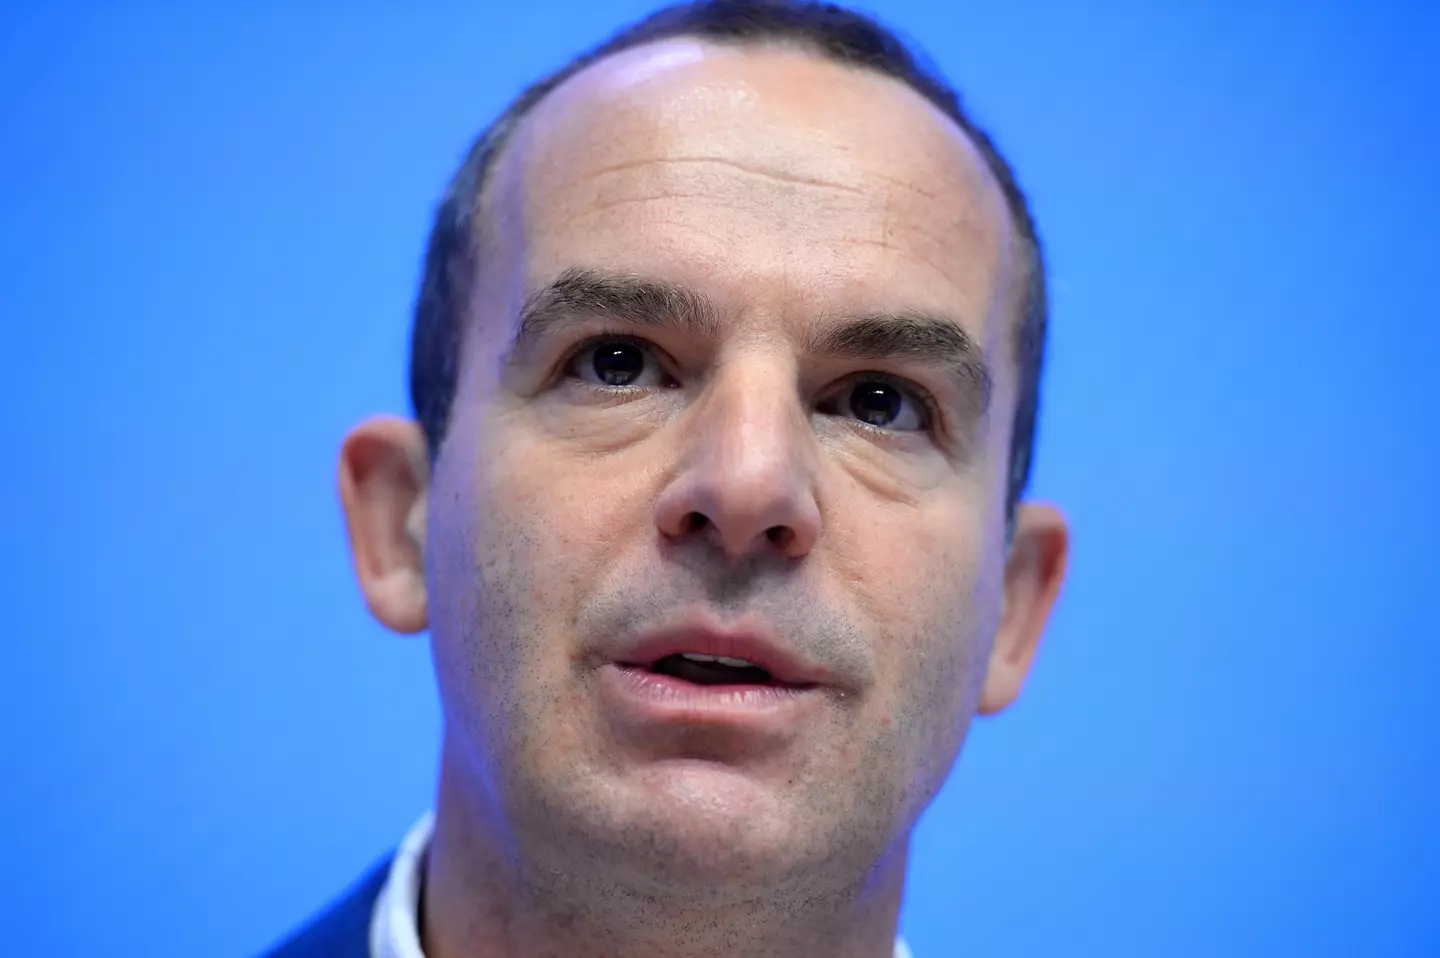 Martin Lewis has shared new advice.